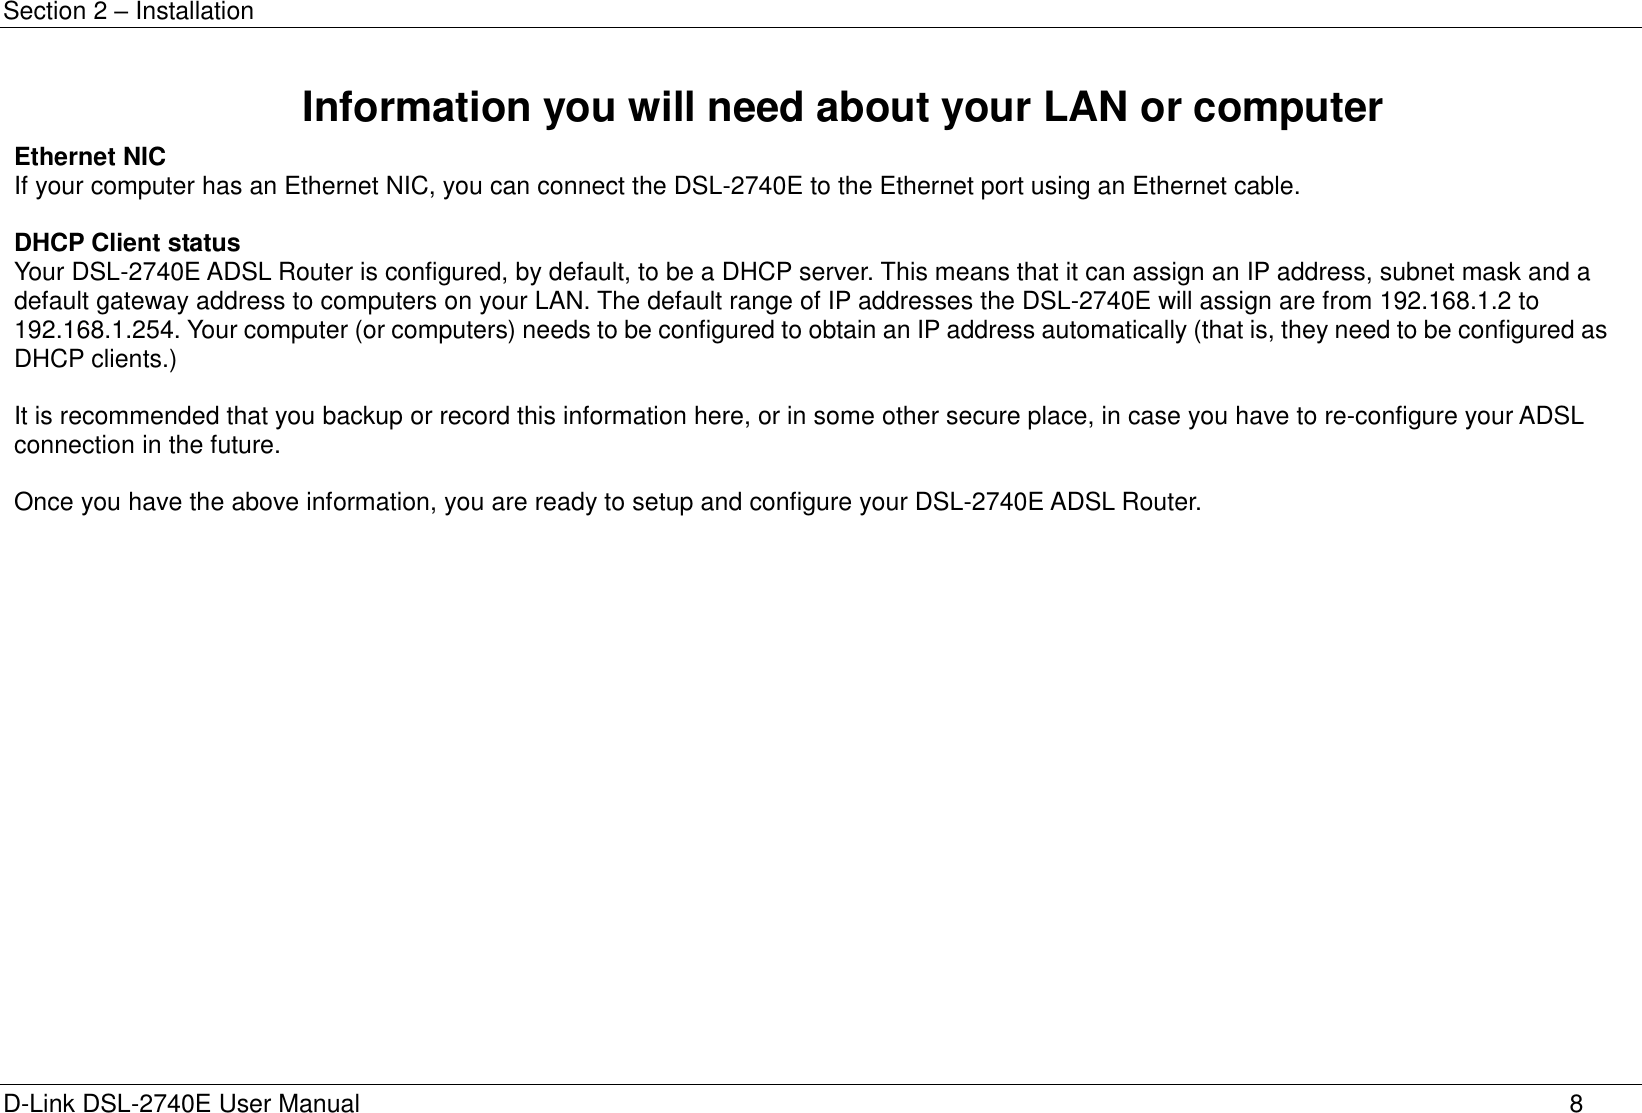 Section 2 – Installation D-Link DSL-2740E User Manual 8 Information you will need about your LAN or computer Ethernet NIC If your computer has an Ethernet NIC, you can connect the DSL-2740E to the Ethernet port using an Ethernet cable.  DHCP Client status Your DSL-2740E ADSL Router is configured, by default, to be a DHCP server. This means that it can assign an IP address, subnet mask and a default gateway address to computers on your LAN. The default range of IP addresses the DSL-2740E will assign are from 192.168.1.2 to 192.168.1.254. Your computer (or computers) needs to be configured to obtain an IP address automatically (that is, they need to be configured as DHCP clients.)  It is recommended that you backup or record this information here, or in some other secure place, in case you have to re-configure your ADSL connection in the future.  Once you have the above information, you are ready to setup and configure your DSL-2740E ADSL Router.